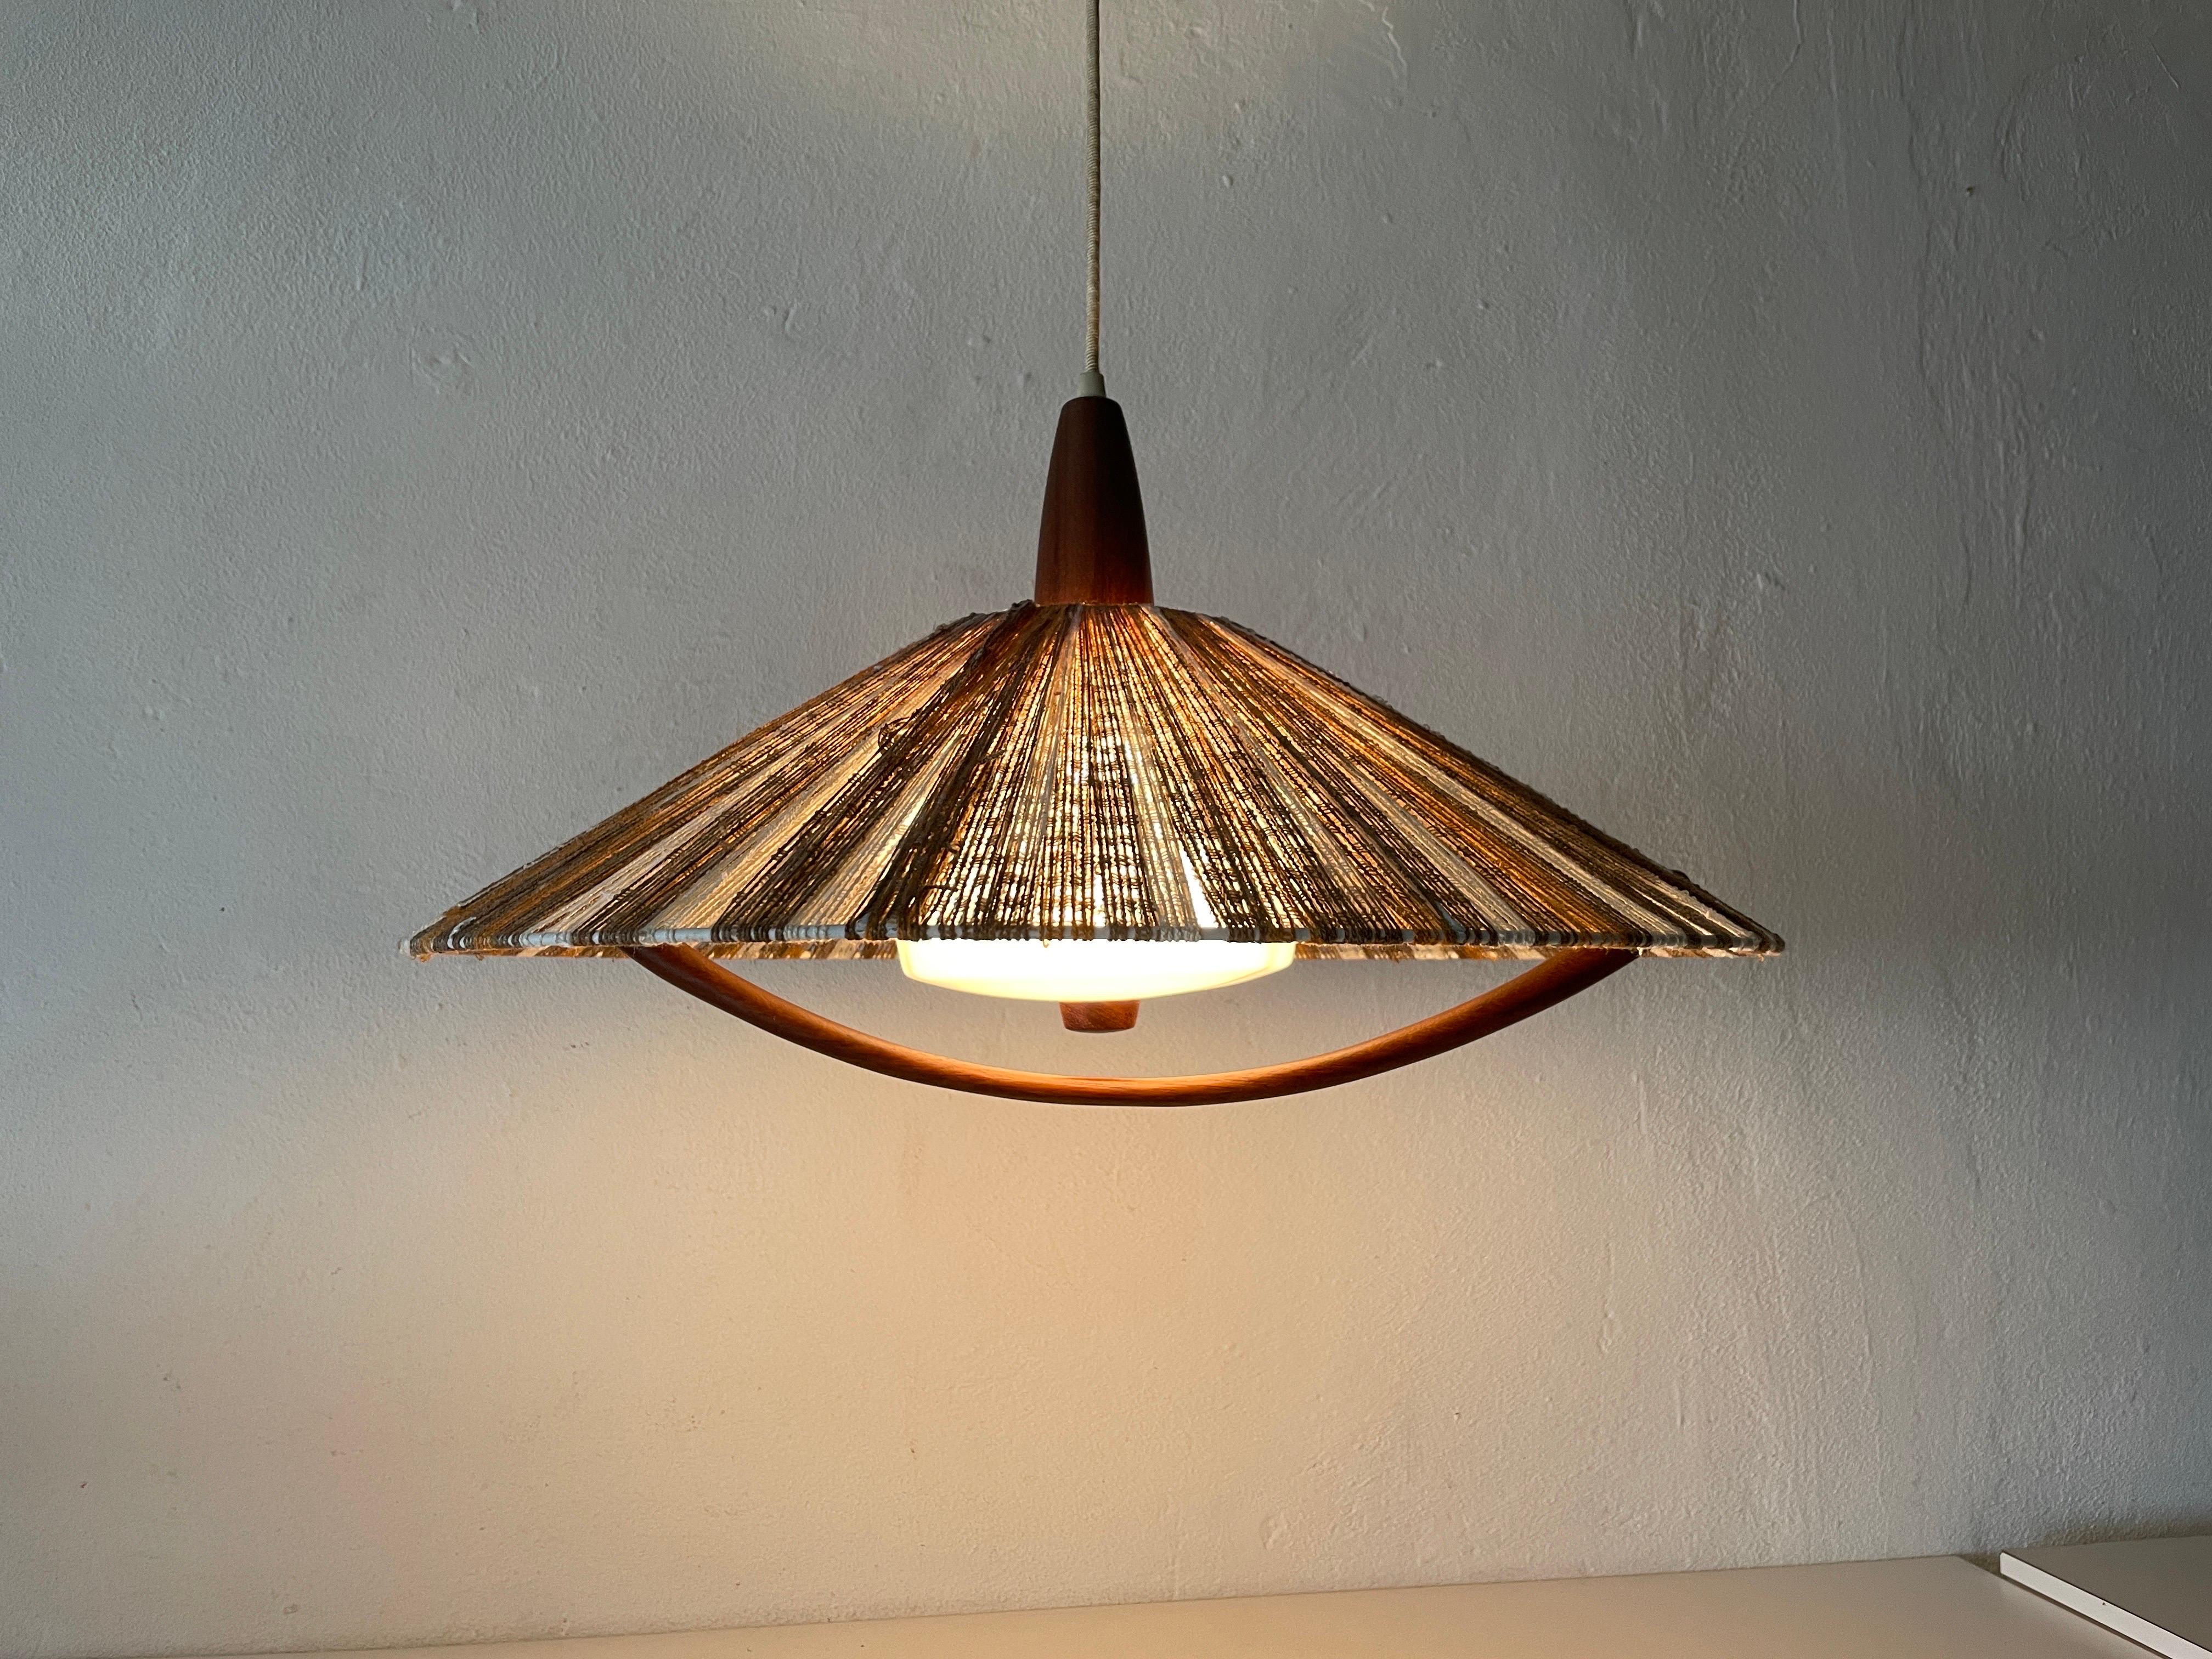 Colorful Raffia Bast and Teak Pendant Lamp by Temde, 1960s, Germany For Sale 3